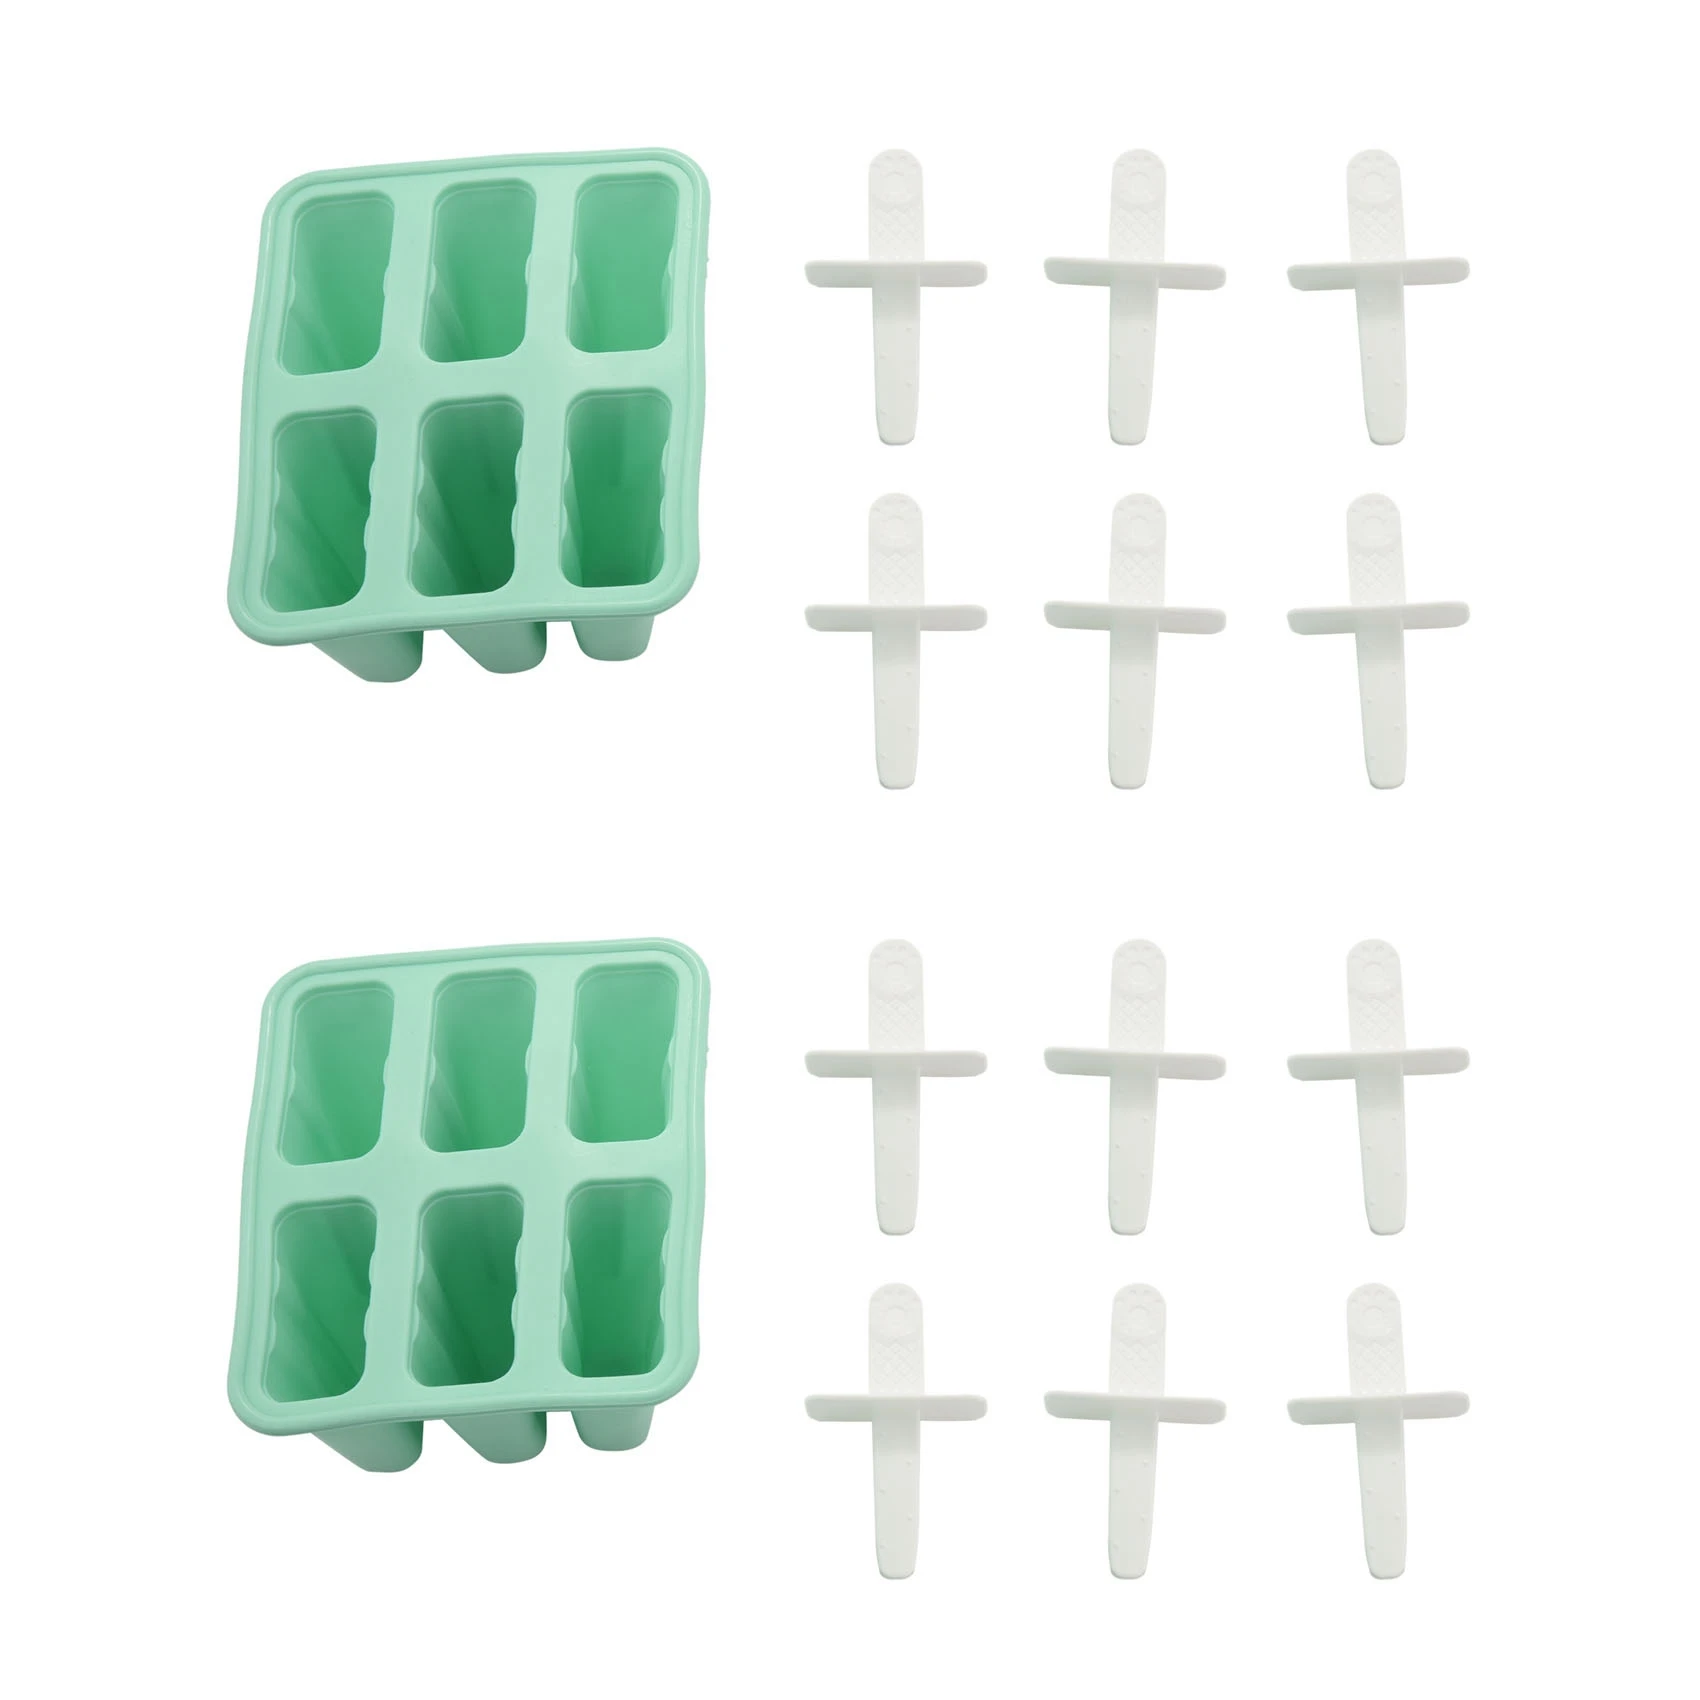 

2X Popsicle Molds 6 Pieces Silicone Ice Molds Bpa Free Popsicle Mold Reusable Easy Release Ice Maker